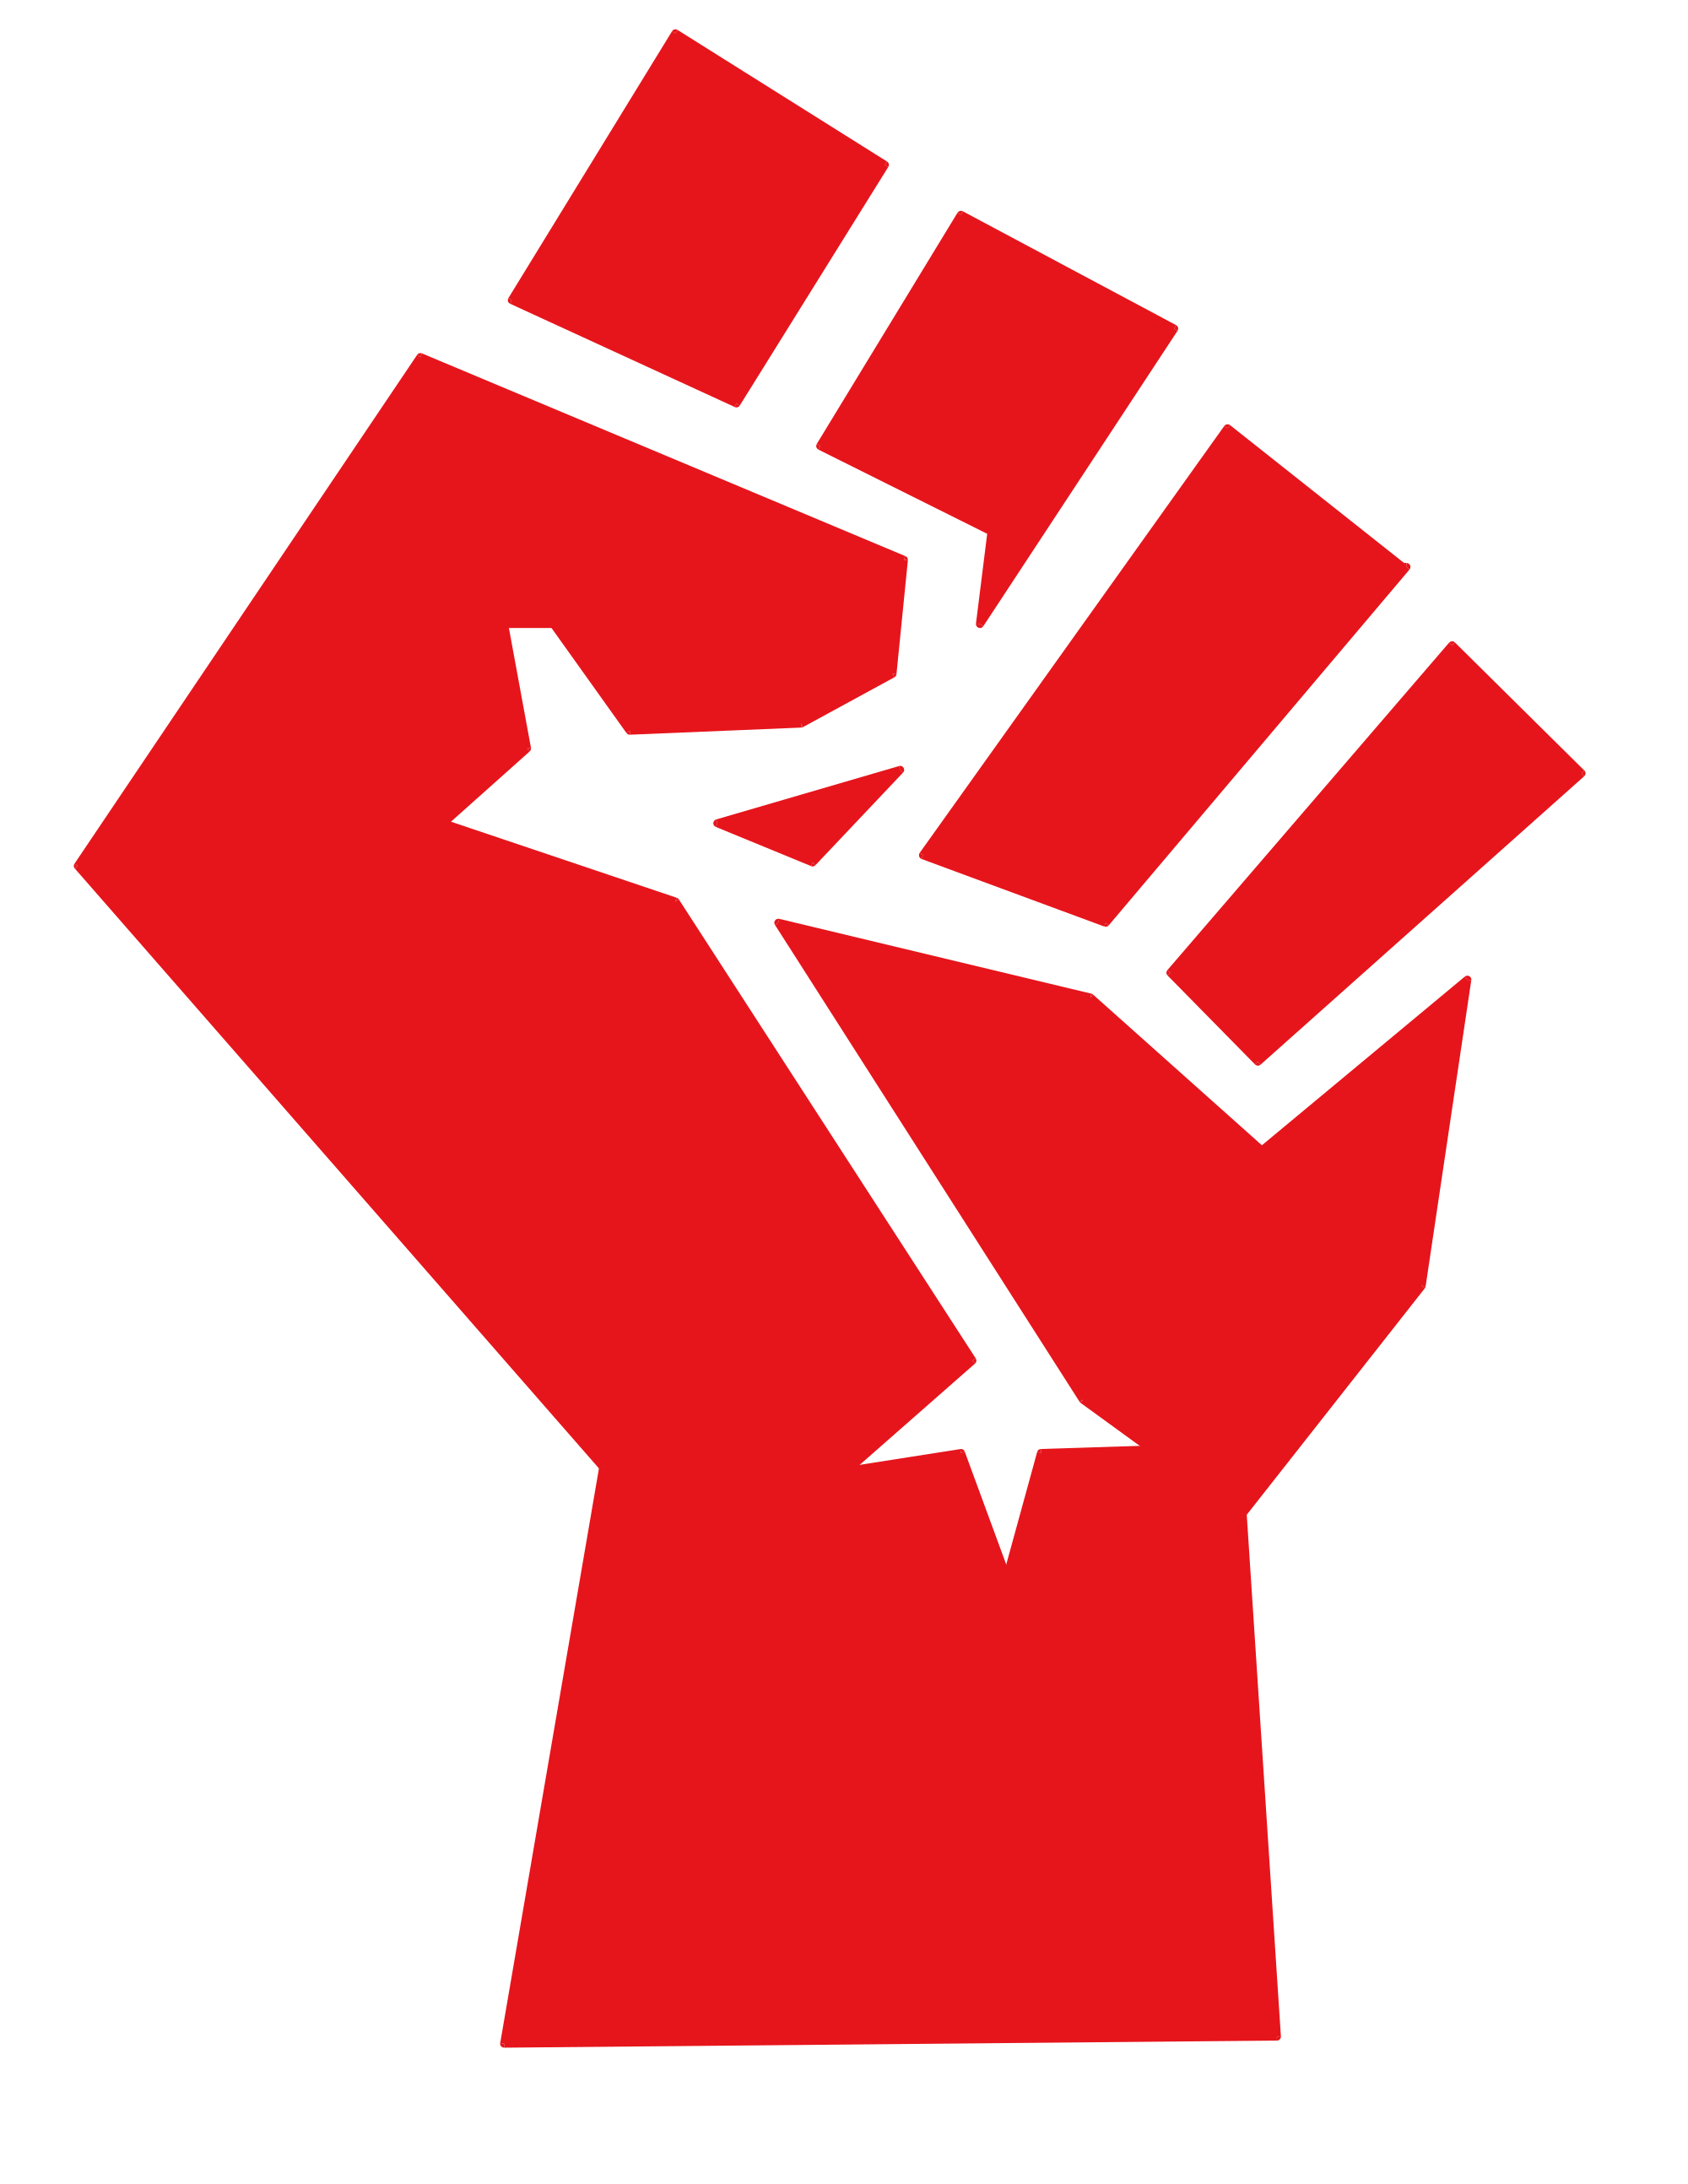 Red Fist Logo - File:Fist.svg - Wikimedia Commons